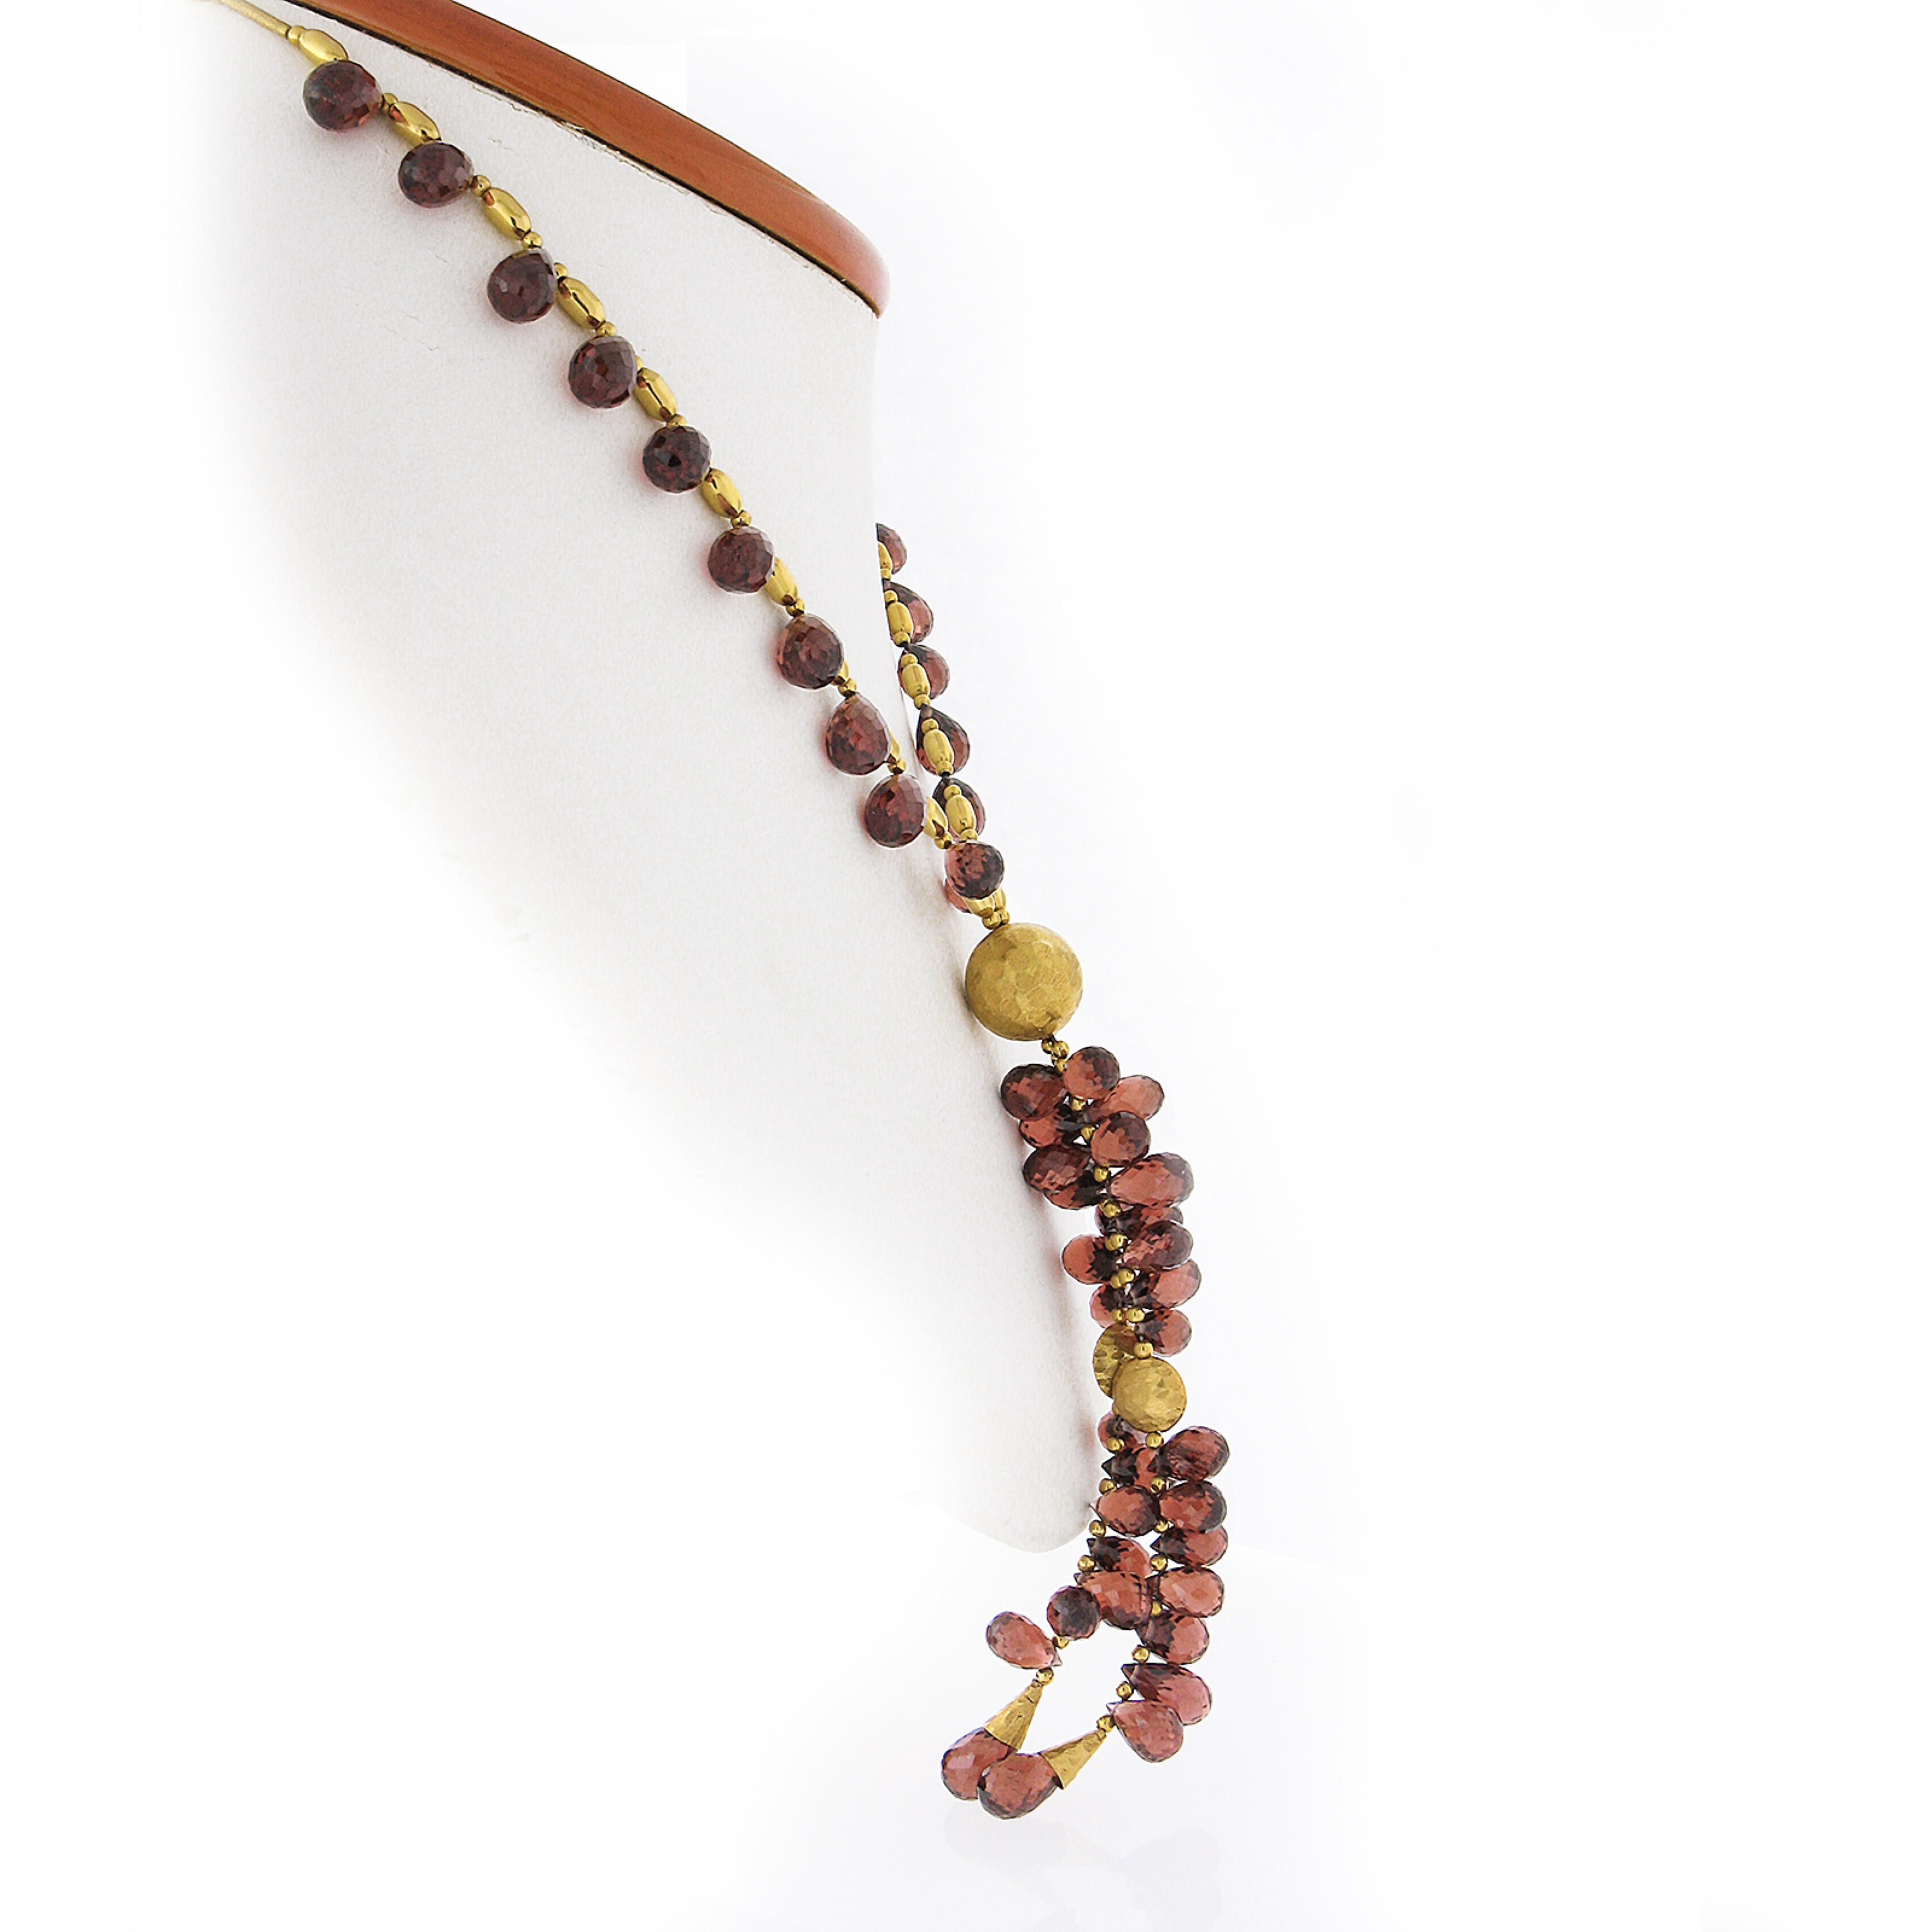 14k Yellow Gold Briolette Cut Tear Drop Garnet & Hammered Bead Necklace In Excellent Condition For Sale In Montclair, NJ